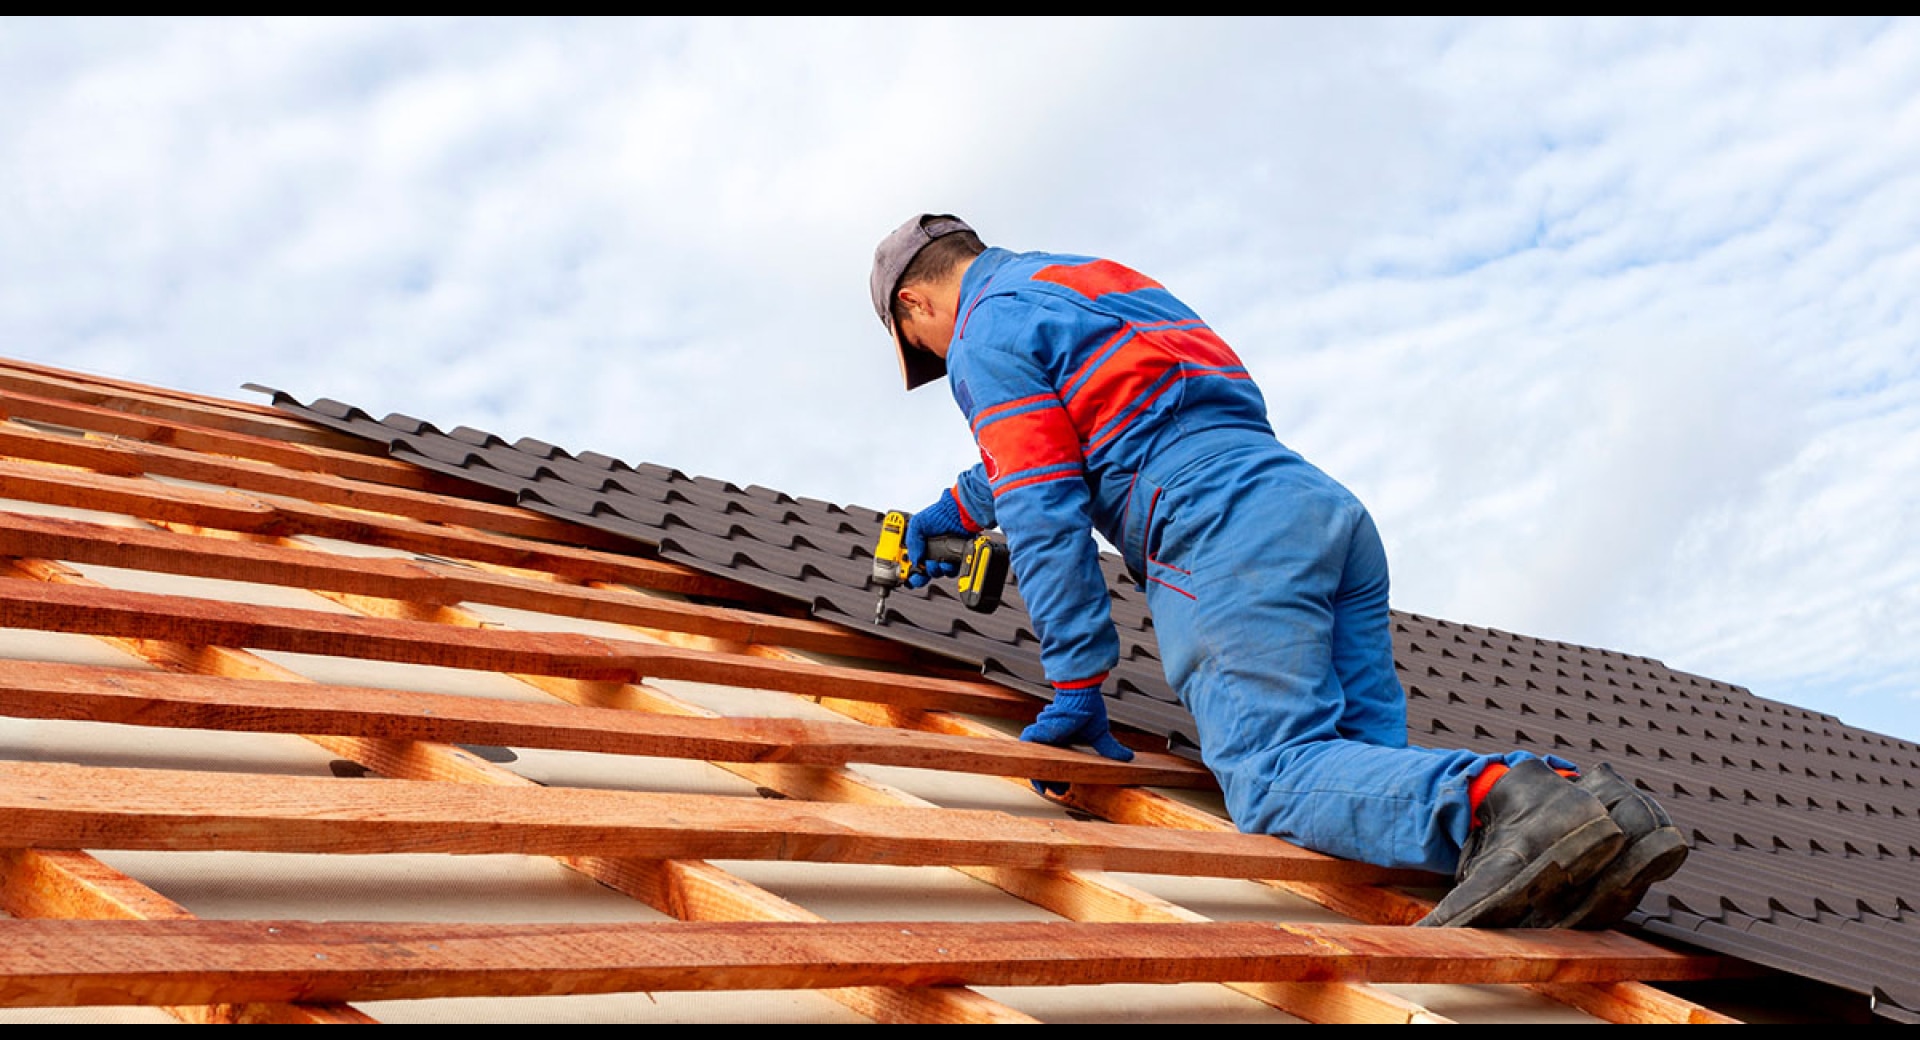 Insurance for Your Roofing Business